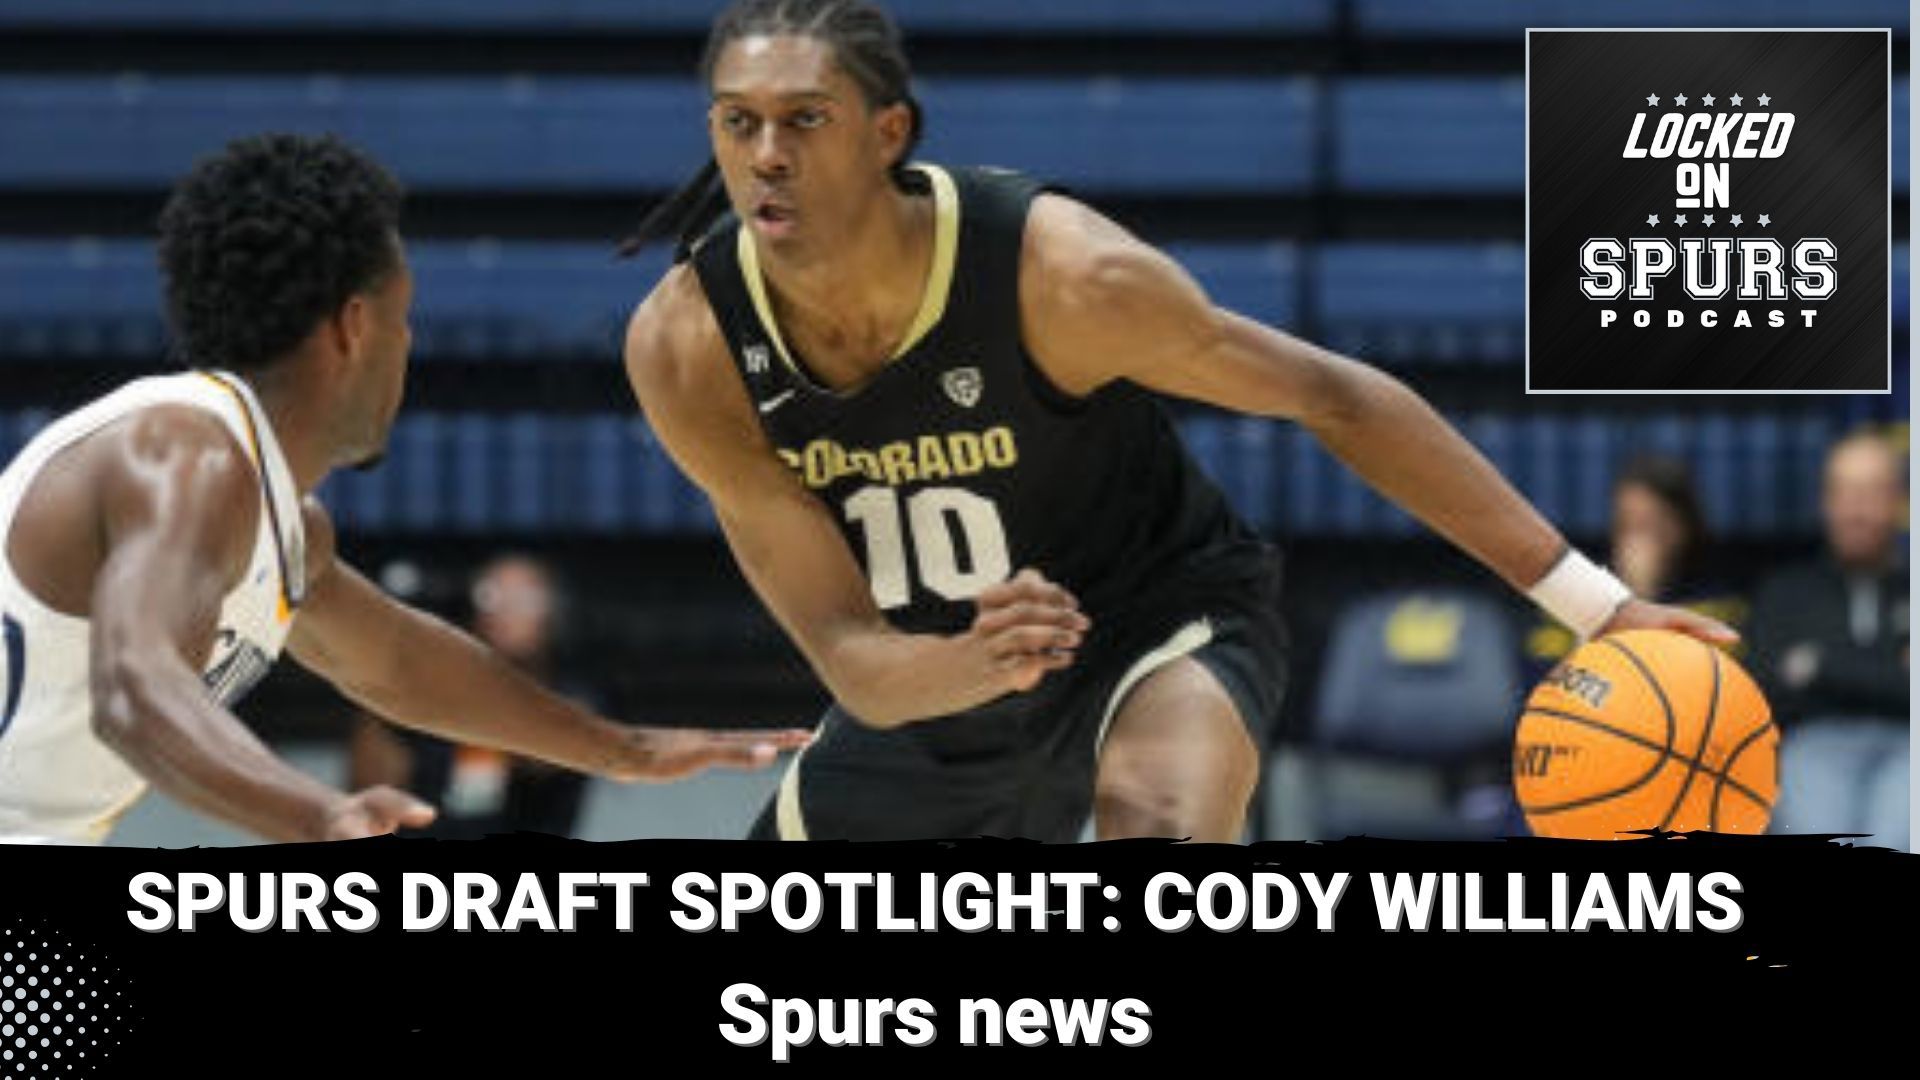 Should the Spurs select Williams if he is on the NBA Draft board?